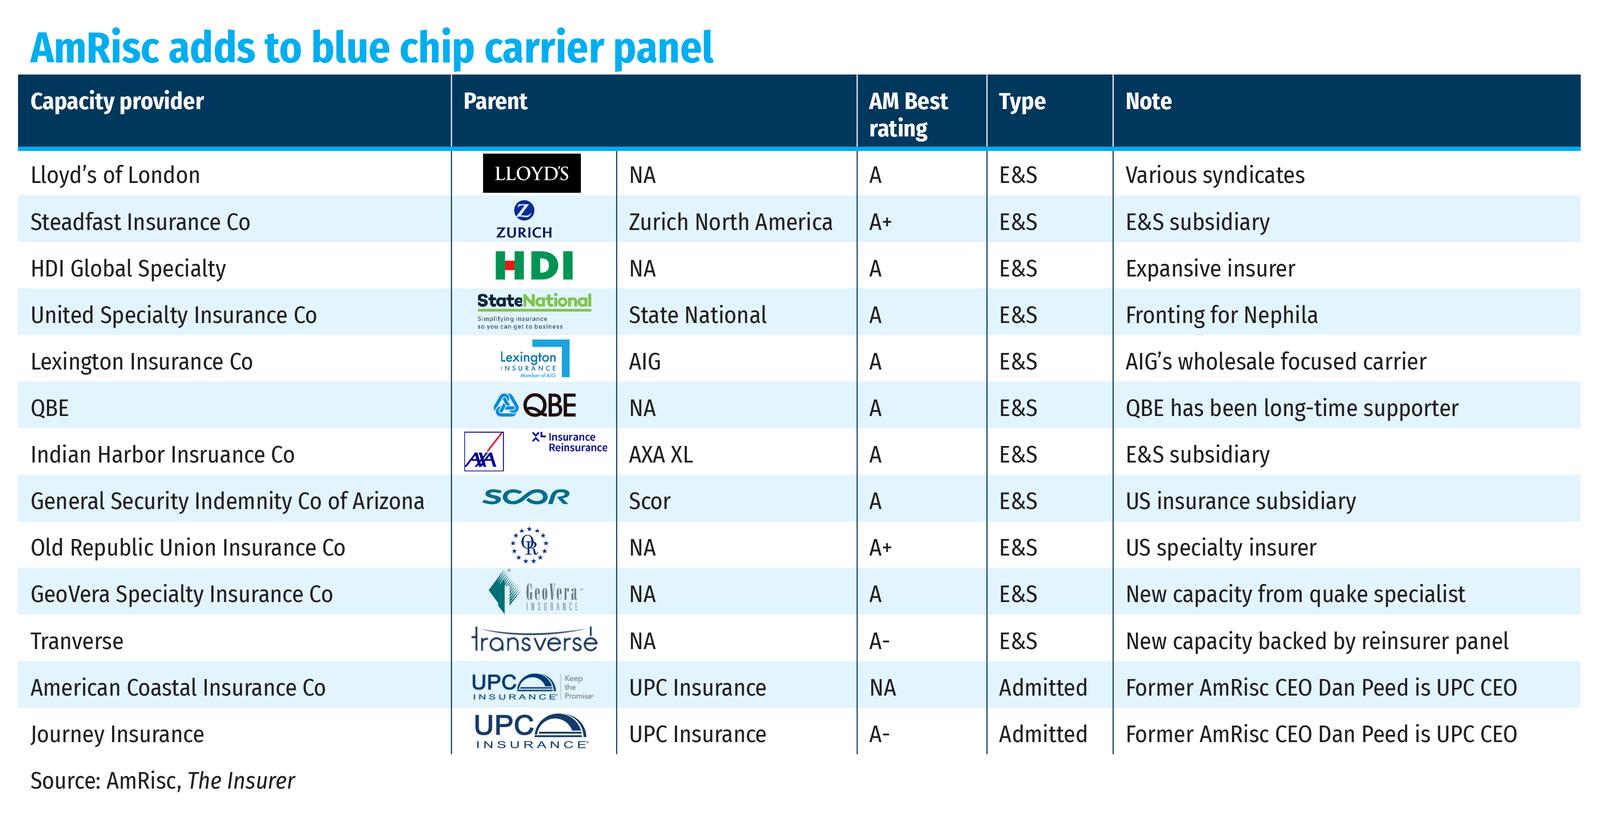 AmRisc adds to blue chip carrier panel